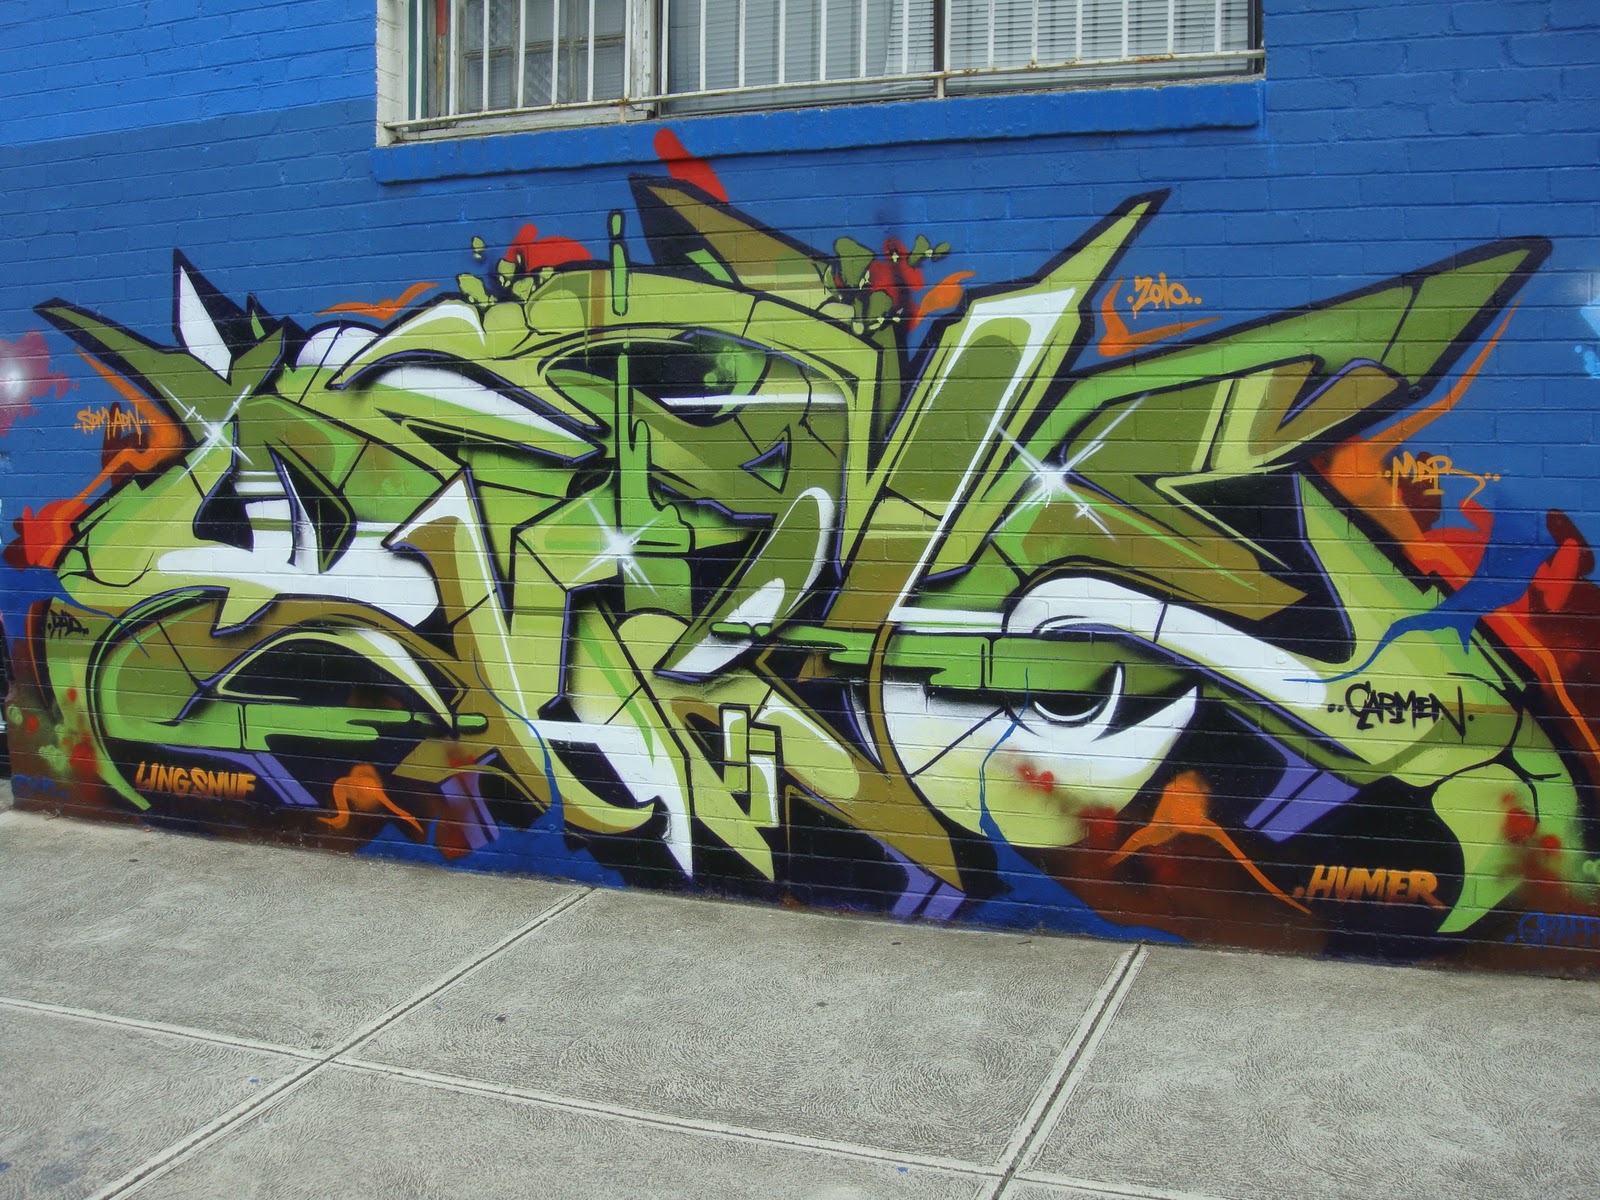 Wildstyle graffiti letters cause hd* all rights and. 